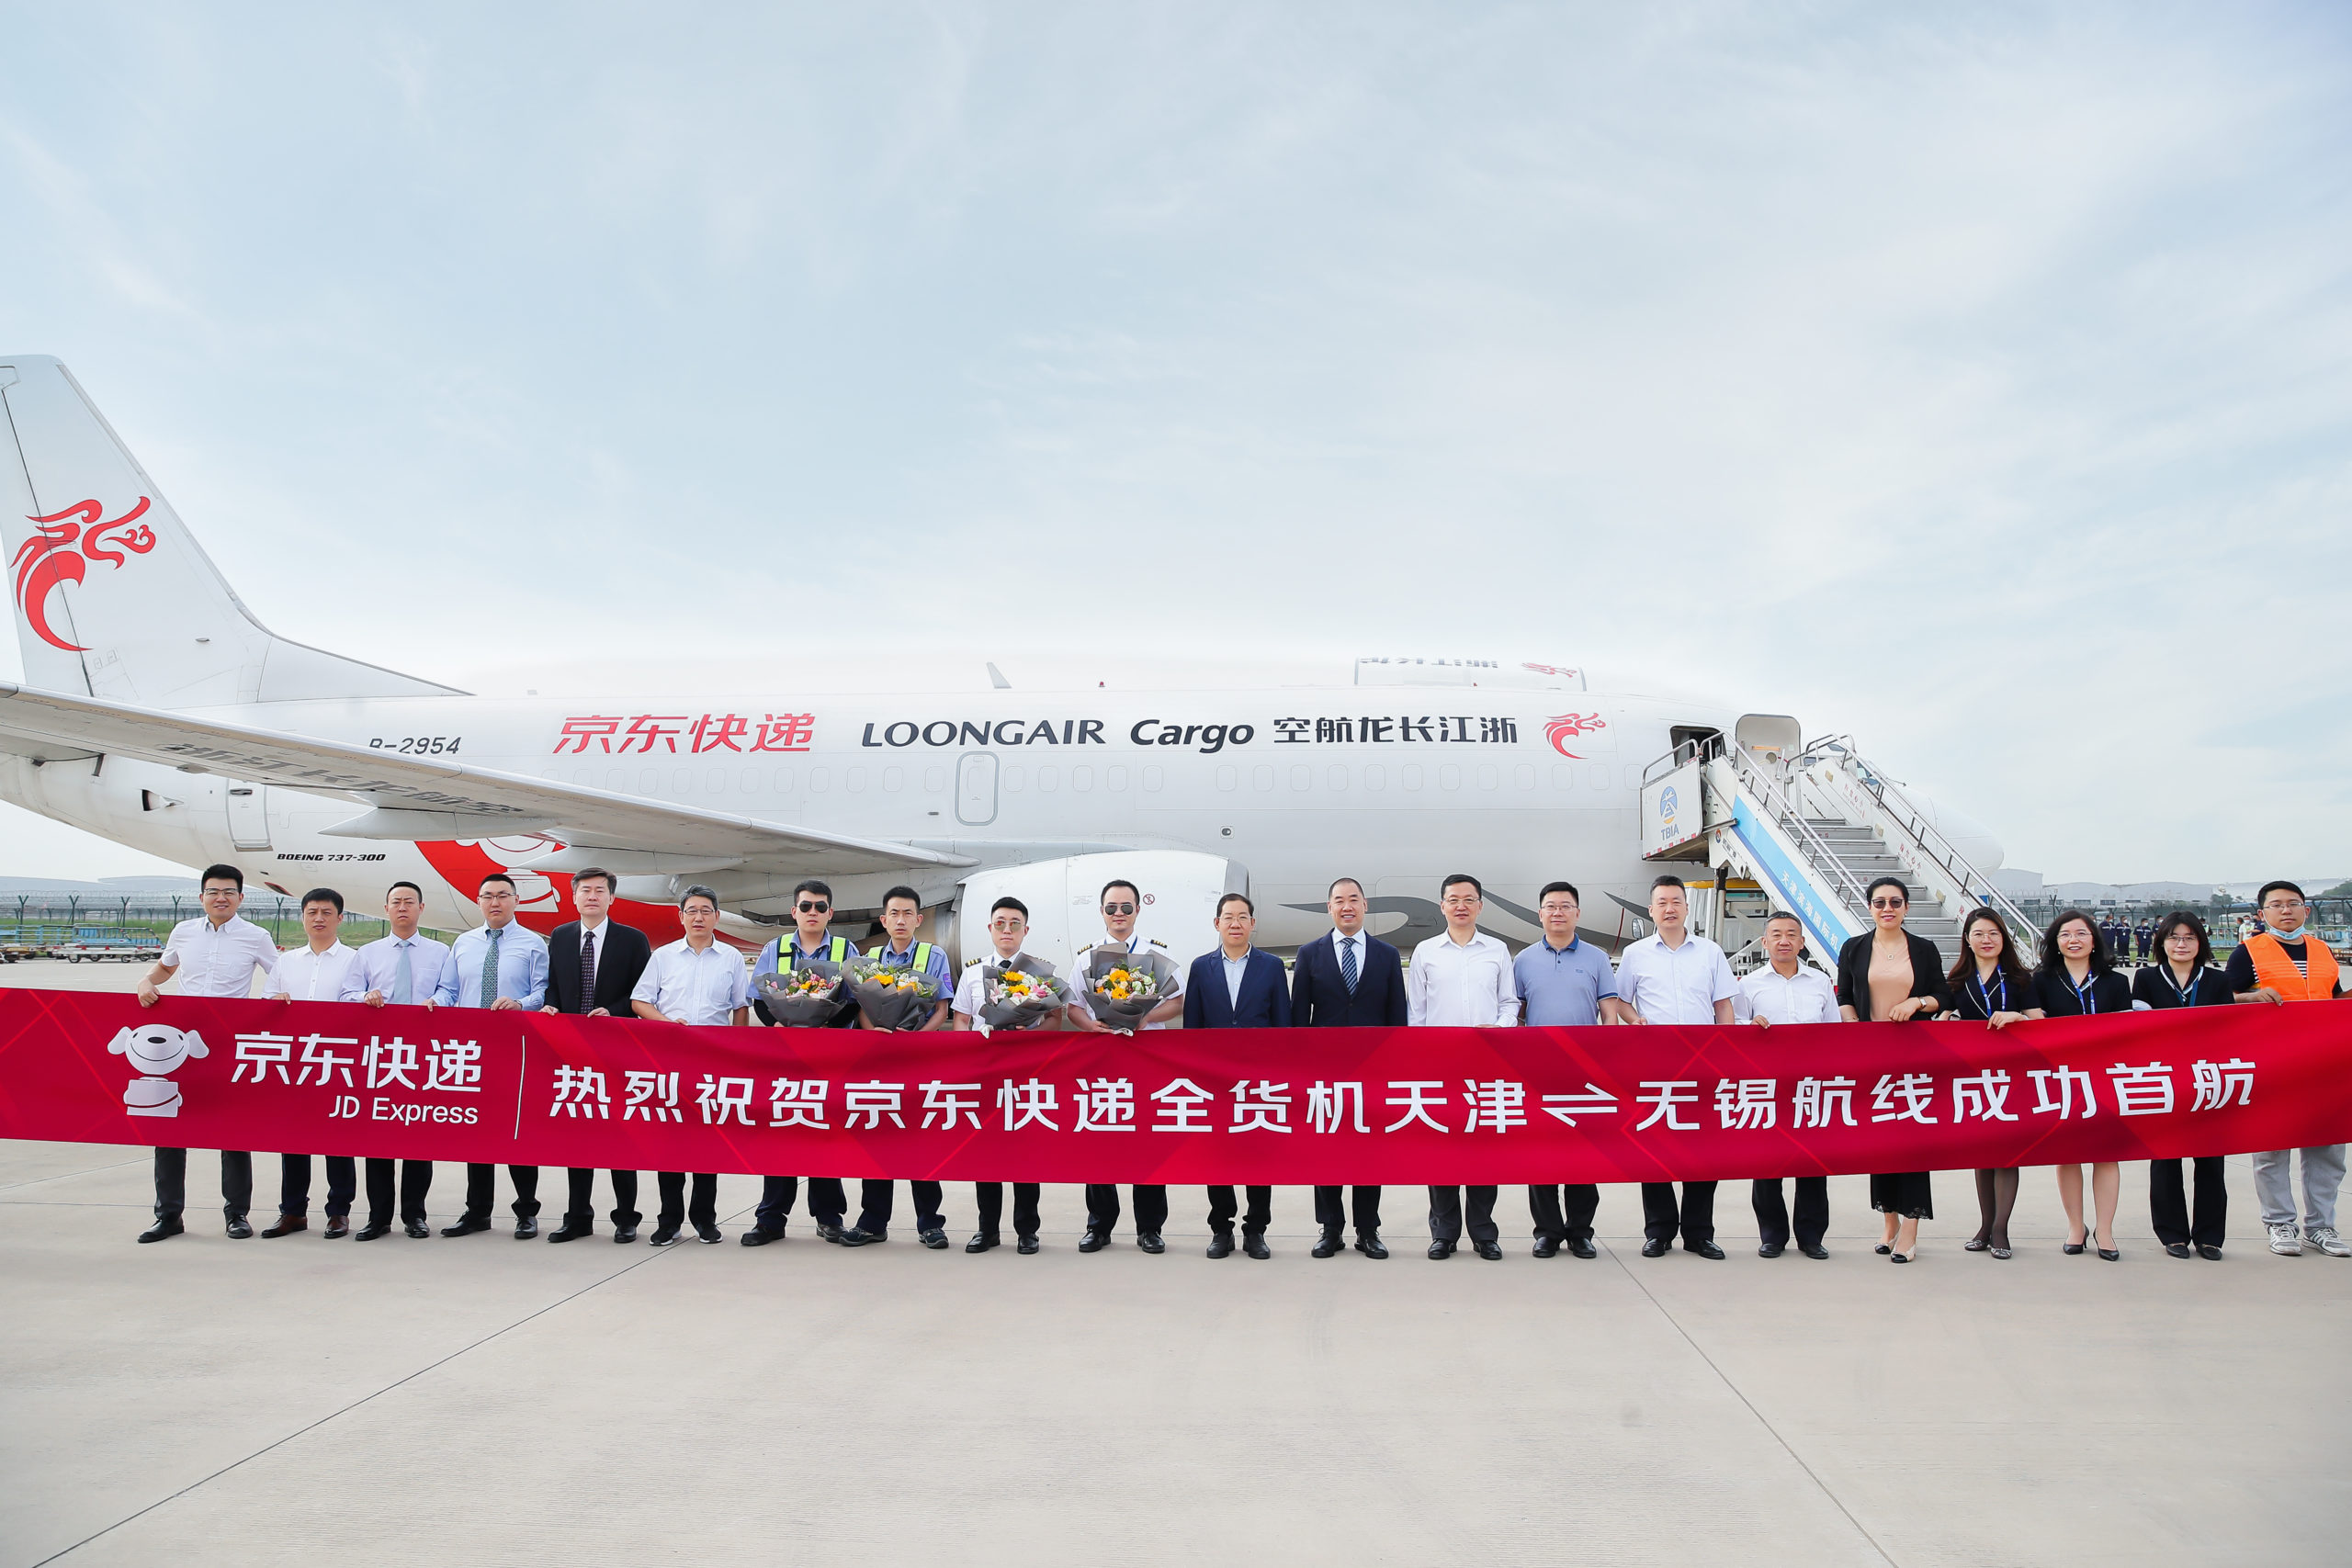 The new flight is also part of a cooperation between JD and Zhejiang Loong Airlines